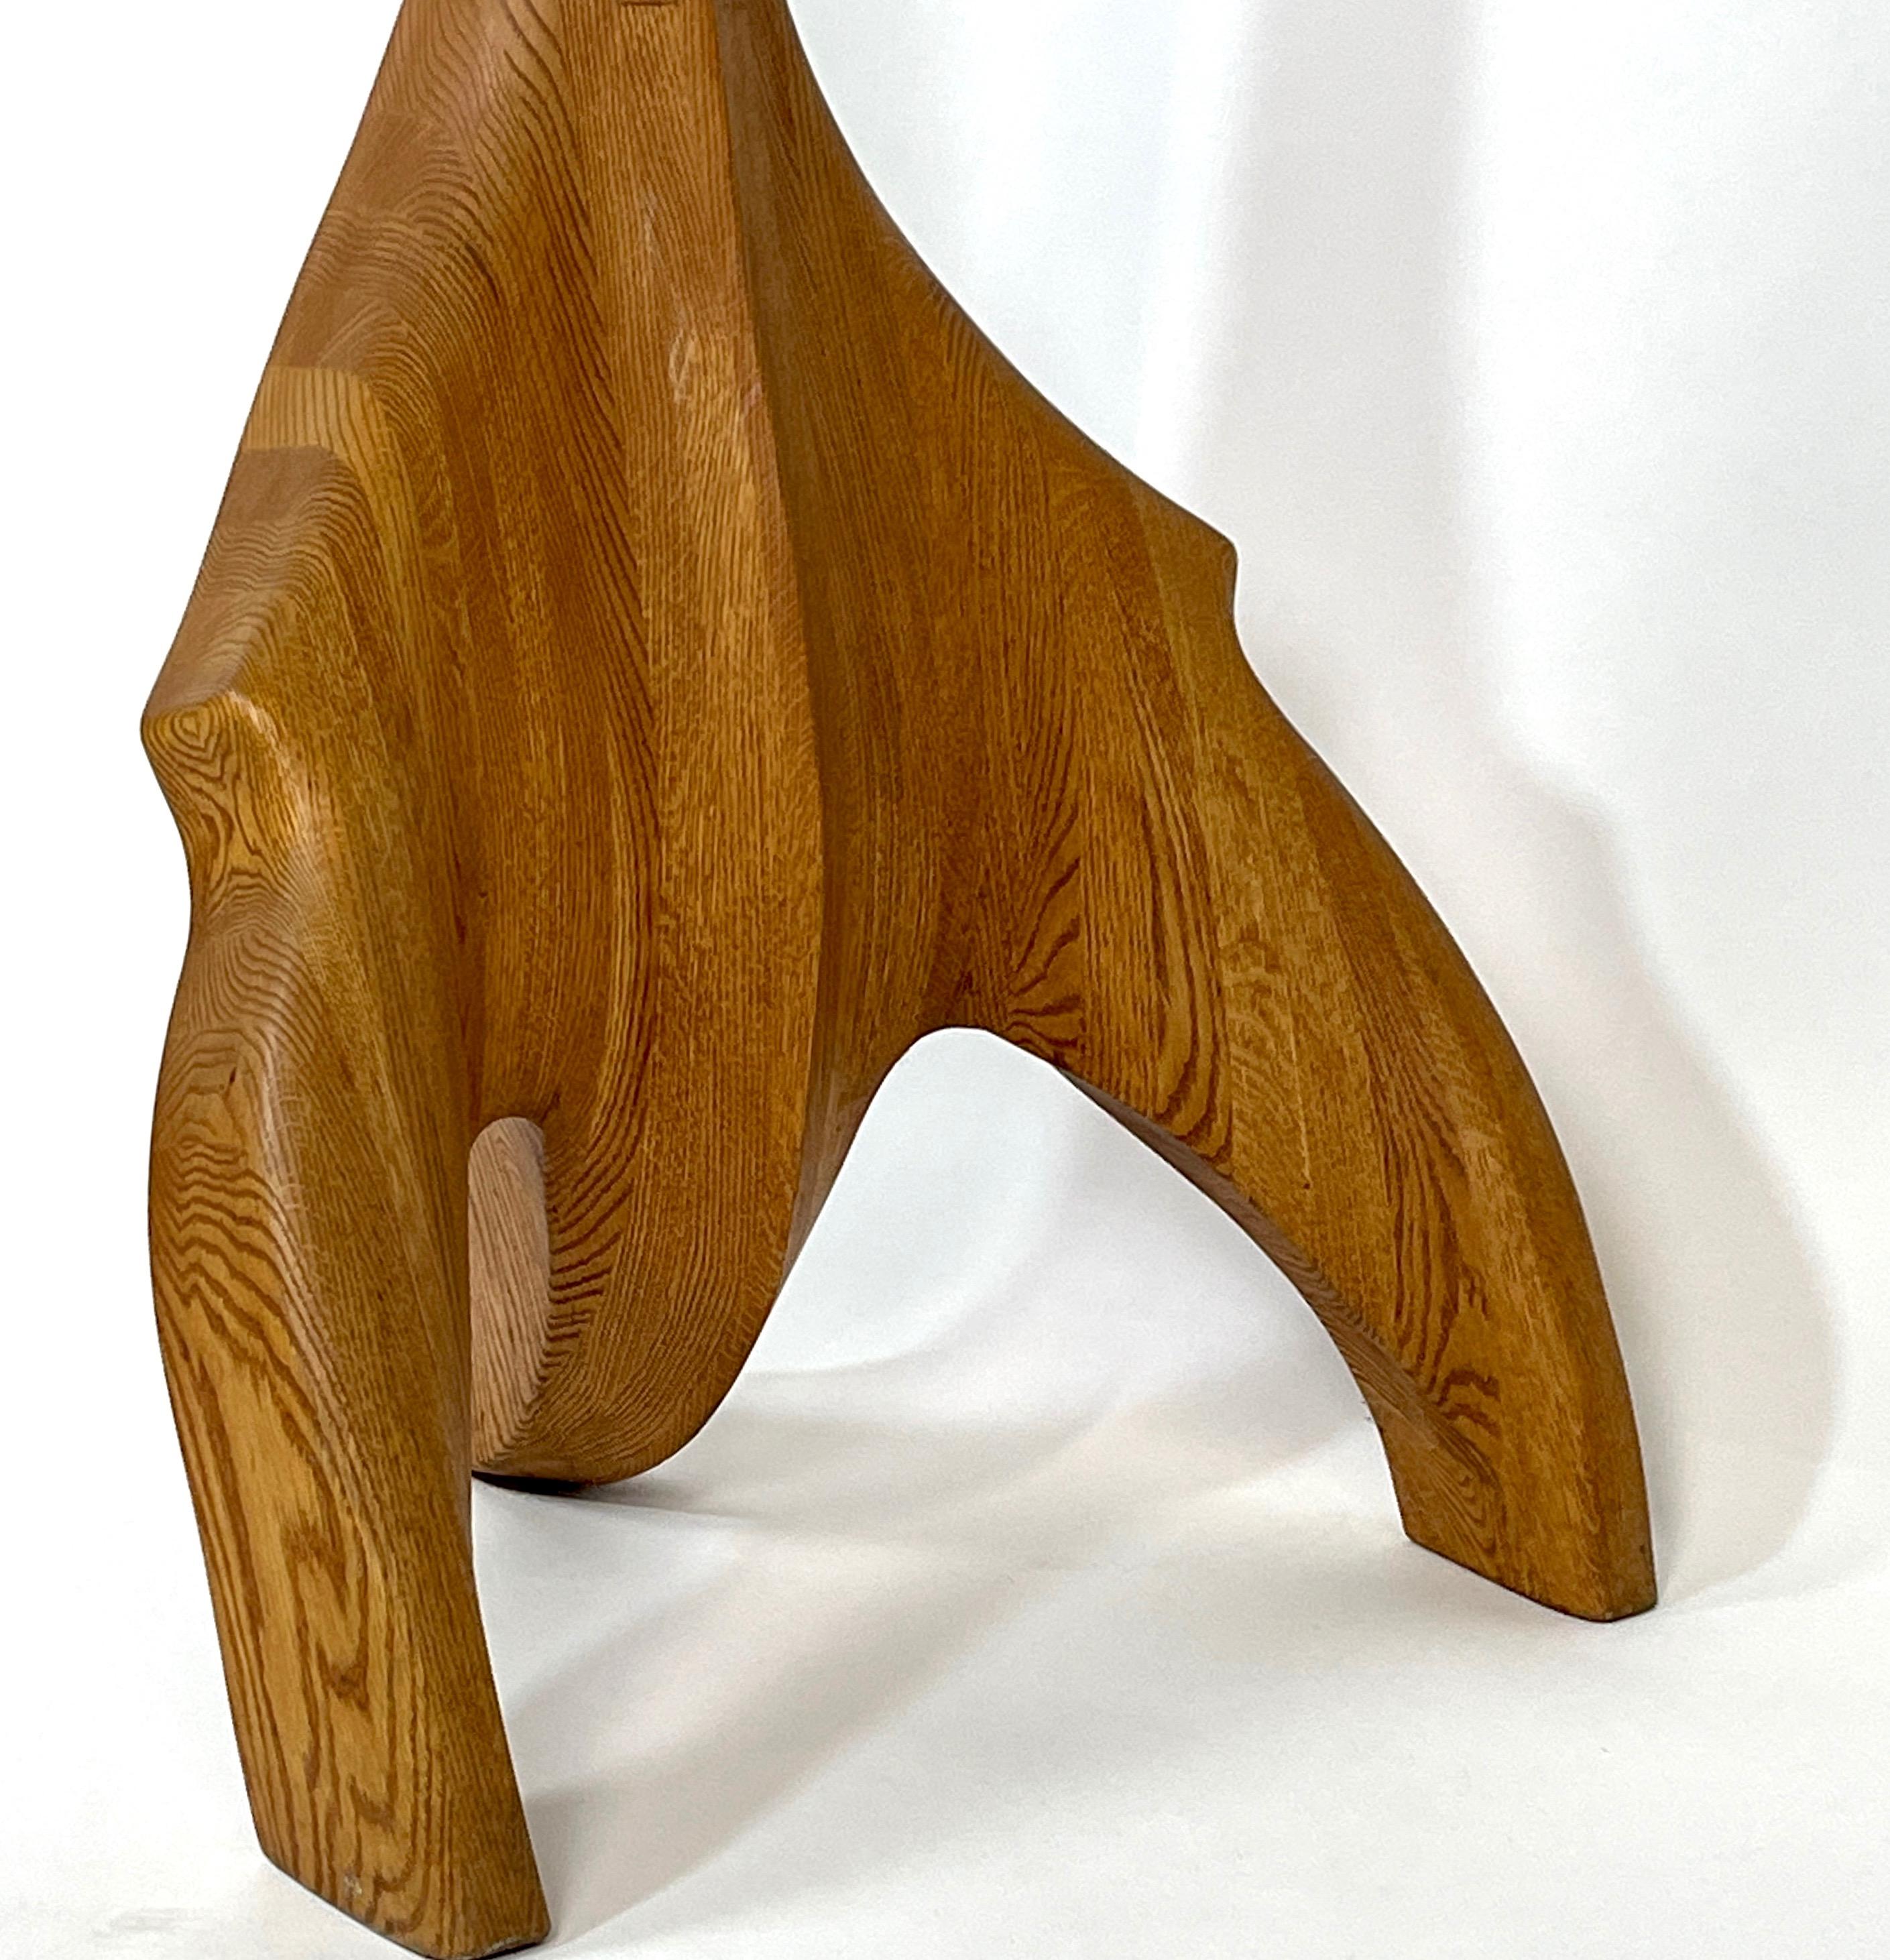 Hand-Carved Tall & Heavy Sculptural Handcrafted Coat Rack in the style of Wendell Castle